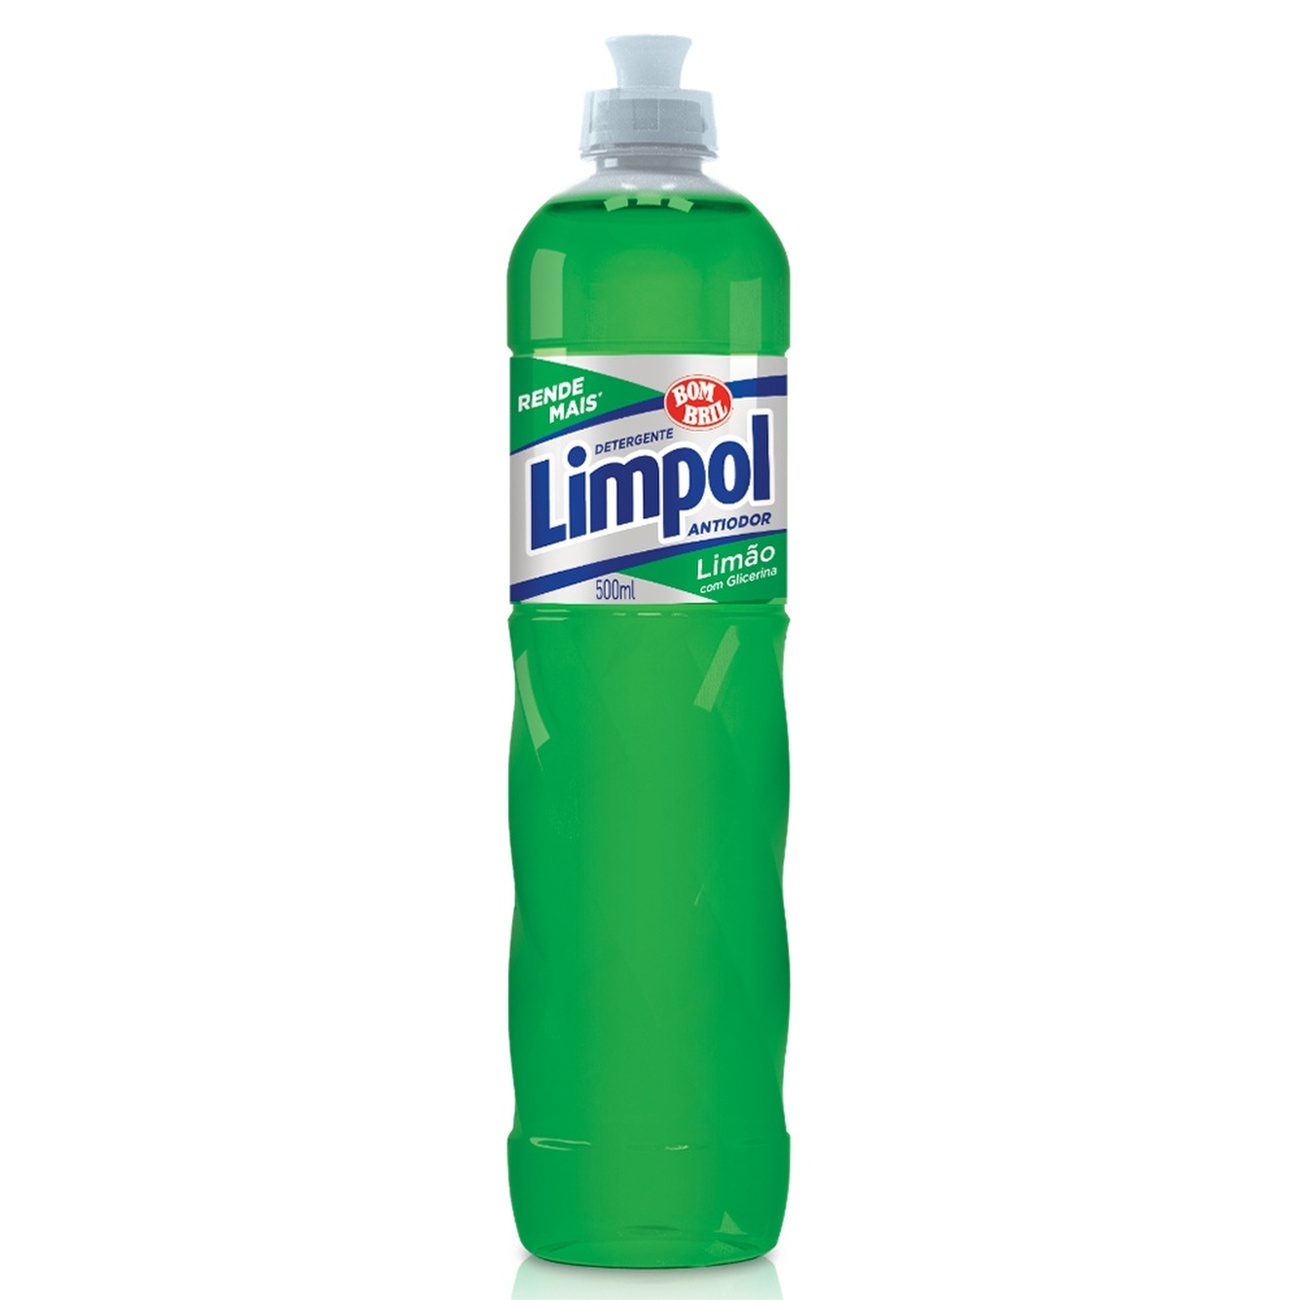 Detergente Limpol Limo 500ml